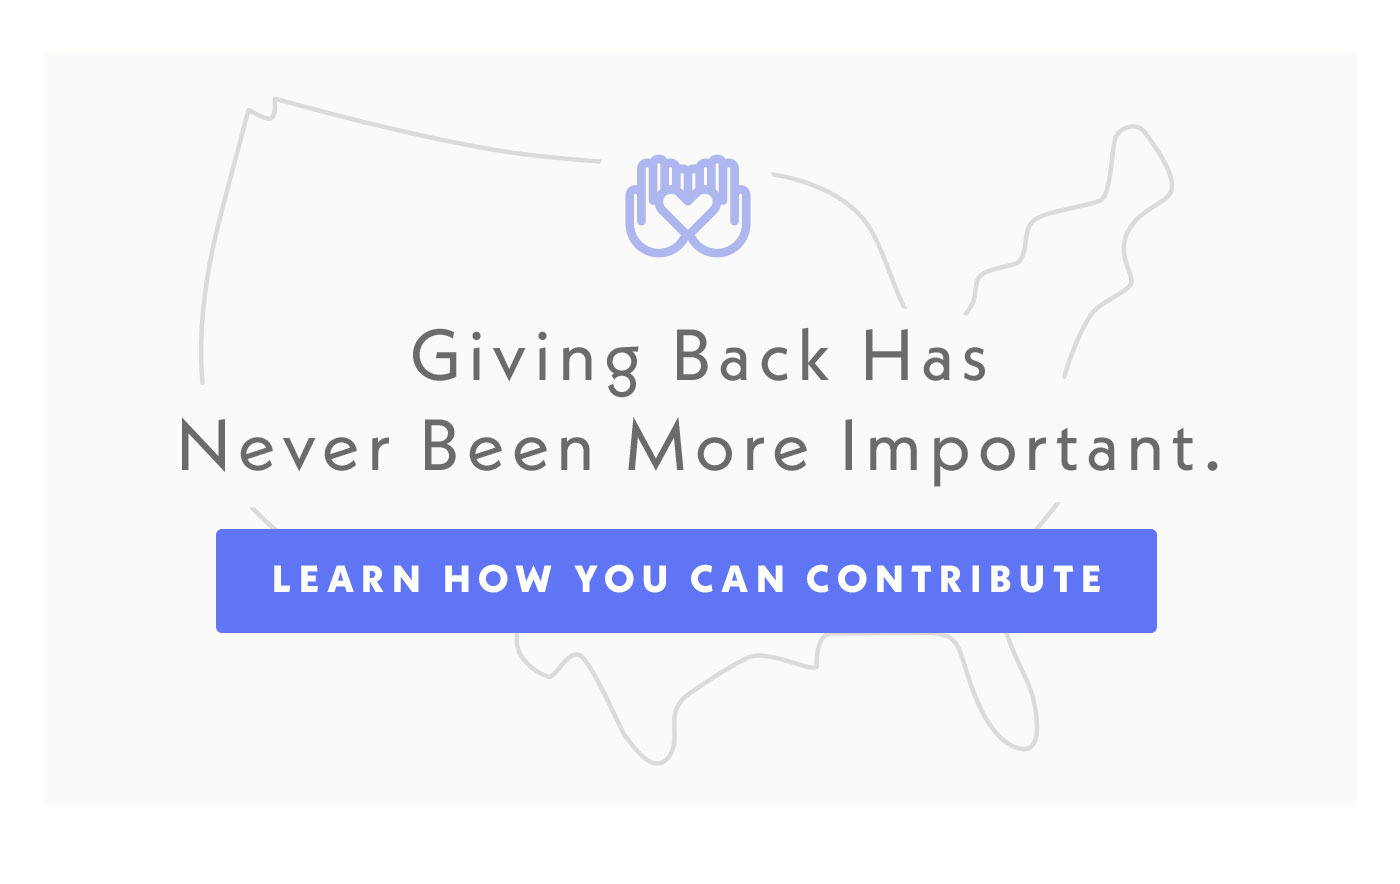 Giving back has never been more important. Learn how you can contribute.